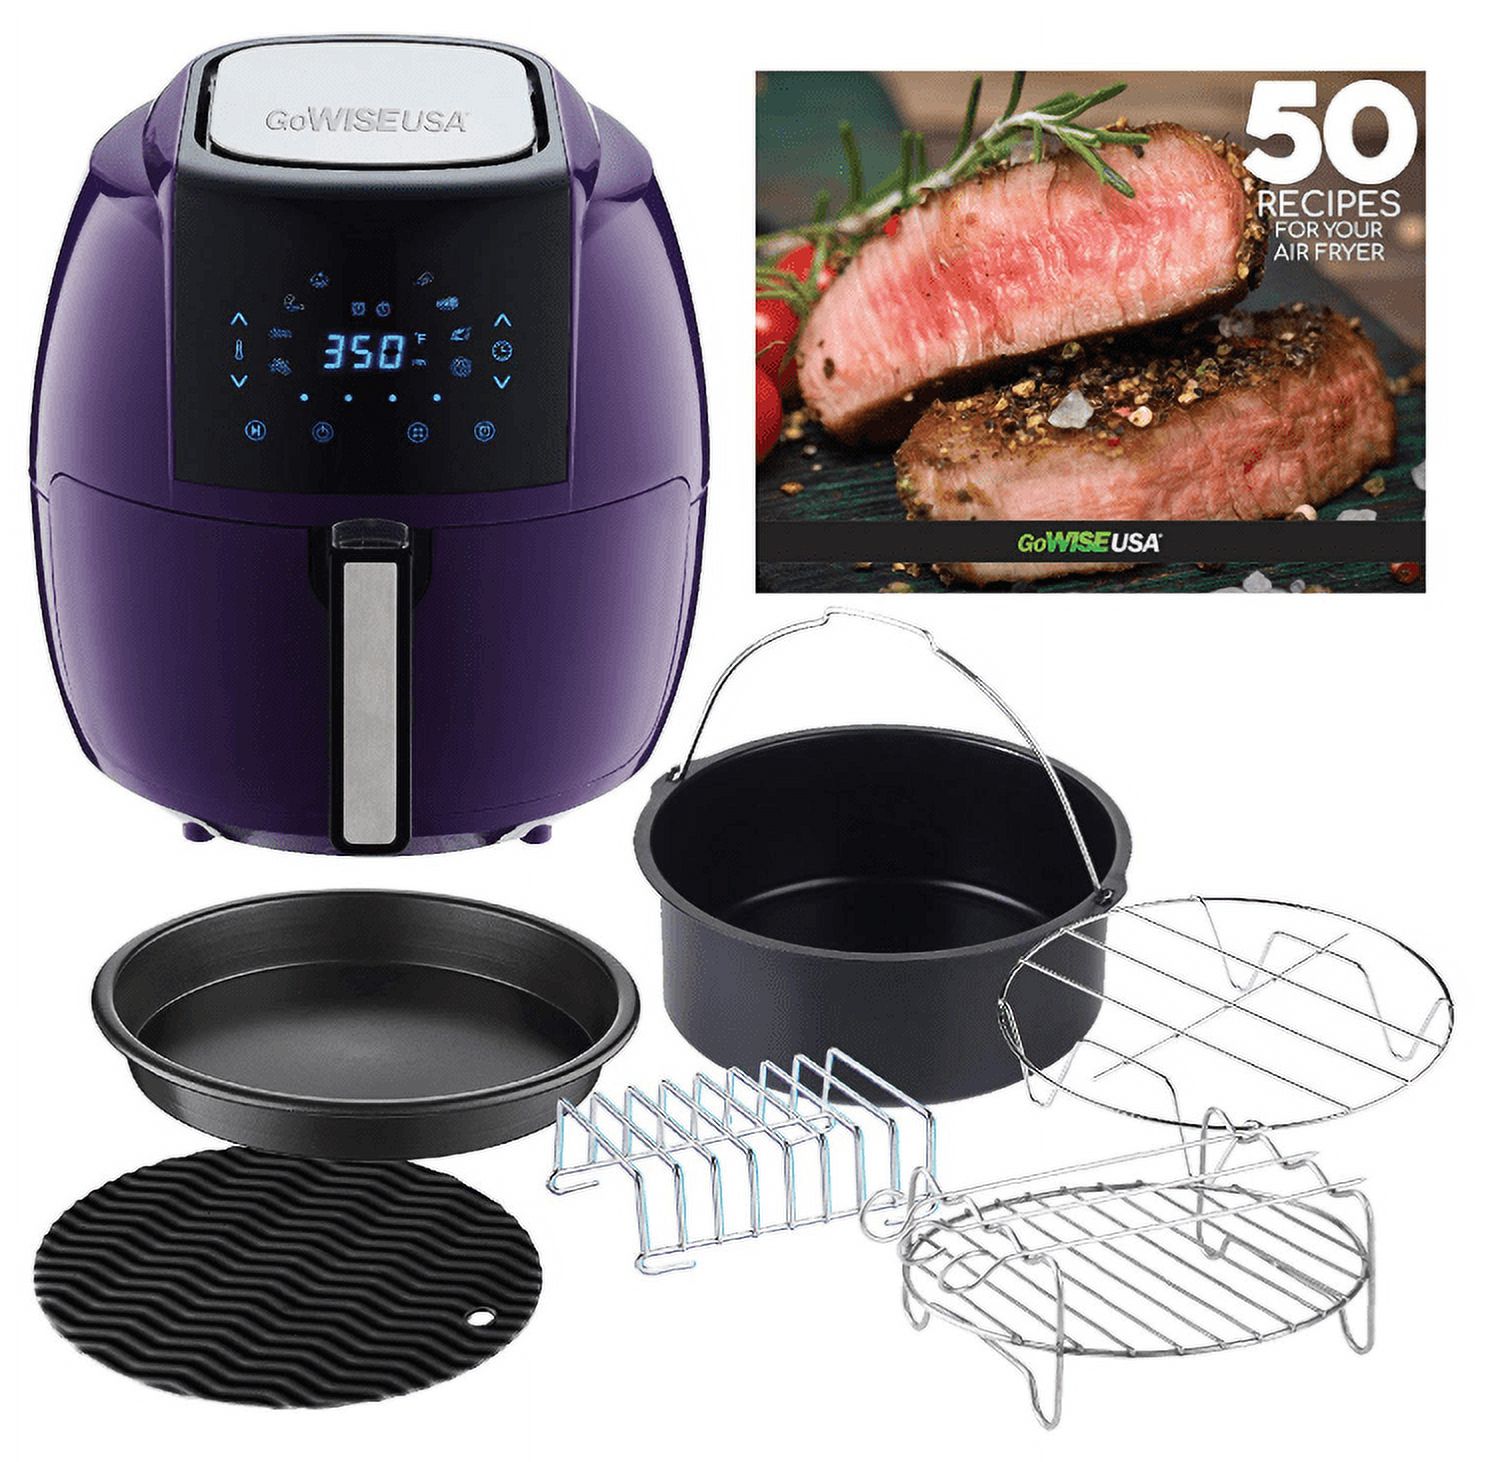 GoWISE USA 5.8-Quarts 8-in-1 Air Fryer XL with 6-Pieces Accessories + 50 Recipes for your Air Fryer Book (Plum) - image 1 of 12